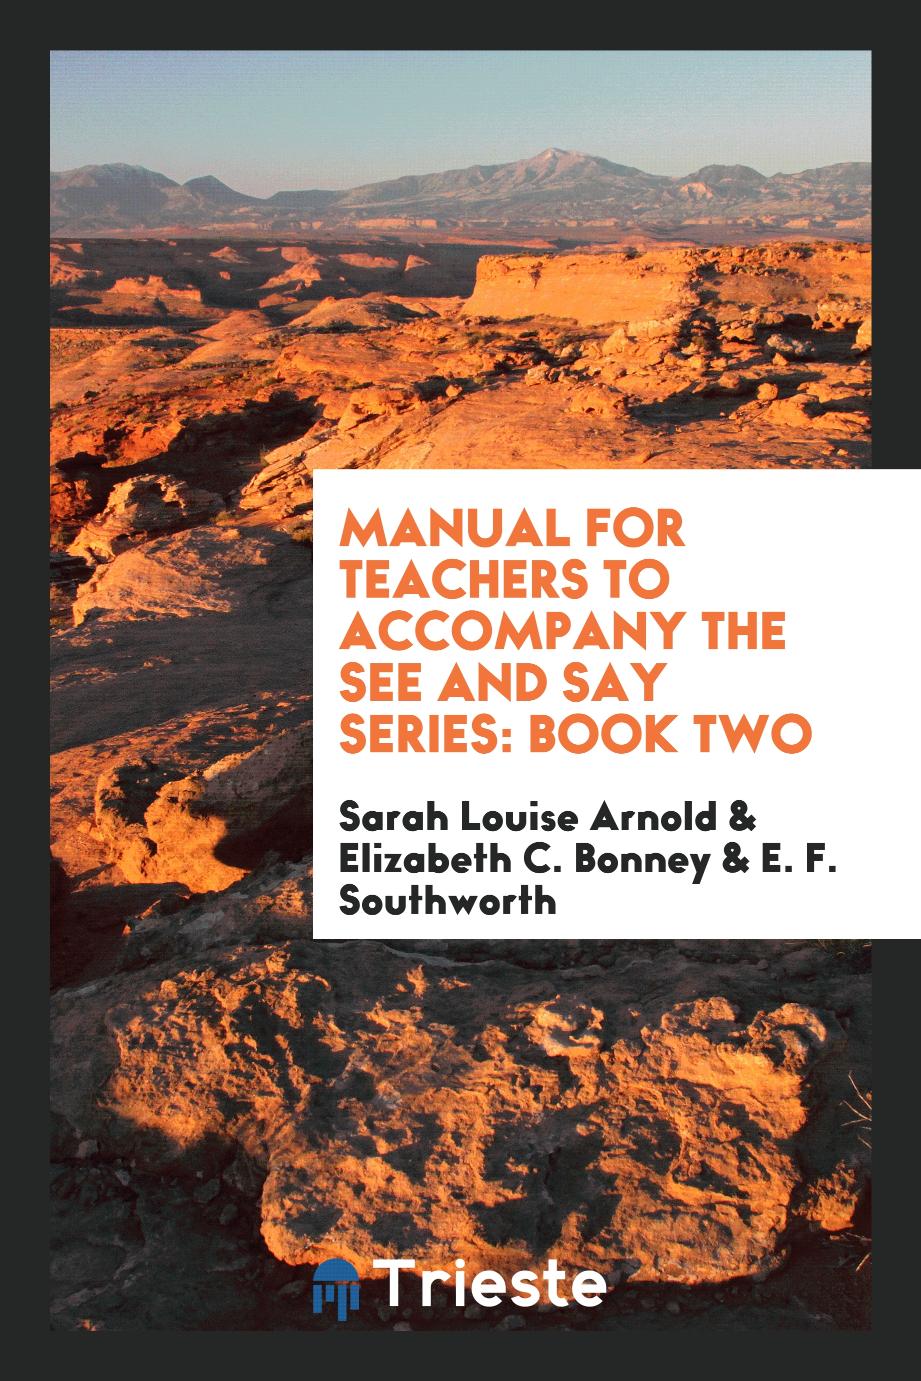 Manual for Teachers to Accompany the See and Say Series: Book Two